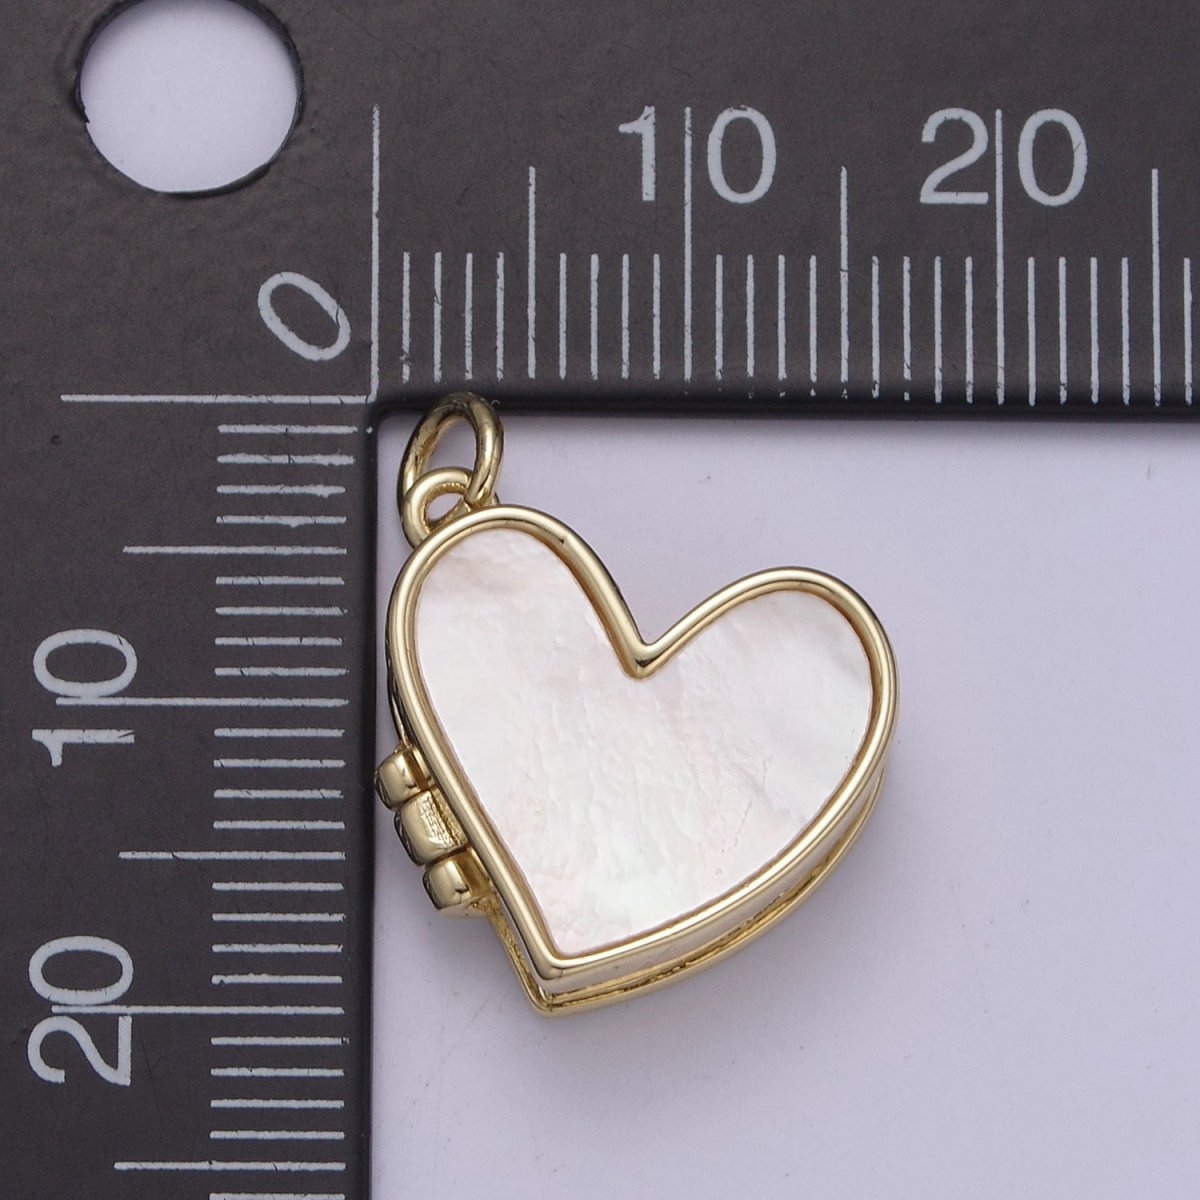 Pearl Locket Charm Necklace 14k Gold Filled Heart Locket for Photo Necklace • Pearl Jewelry W-193 - DLUXCA